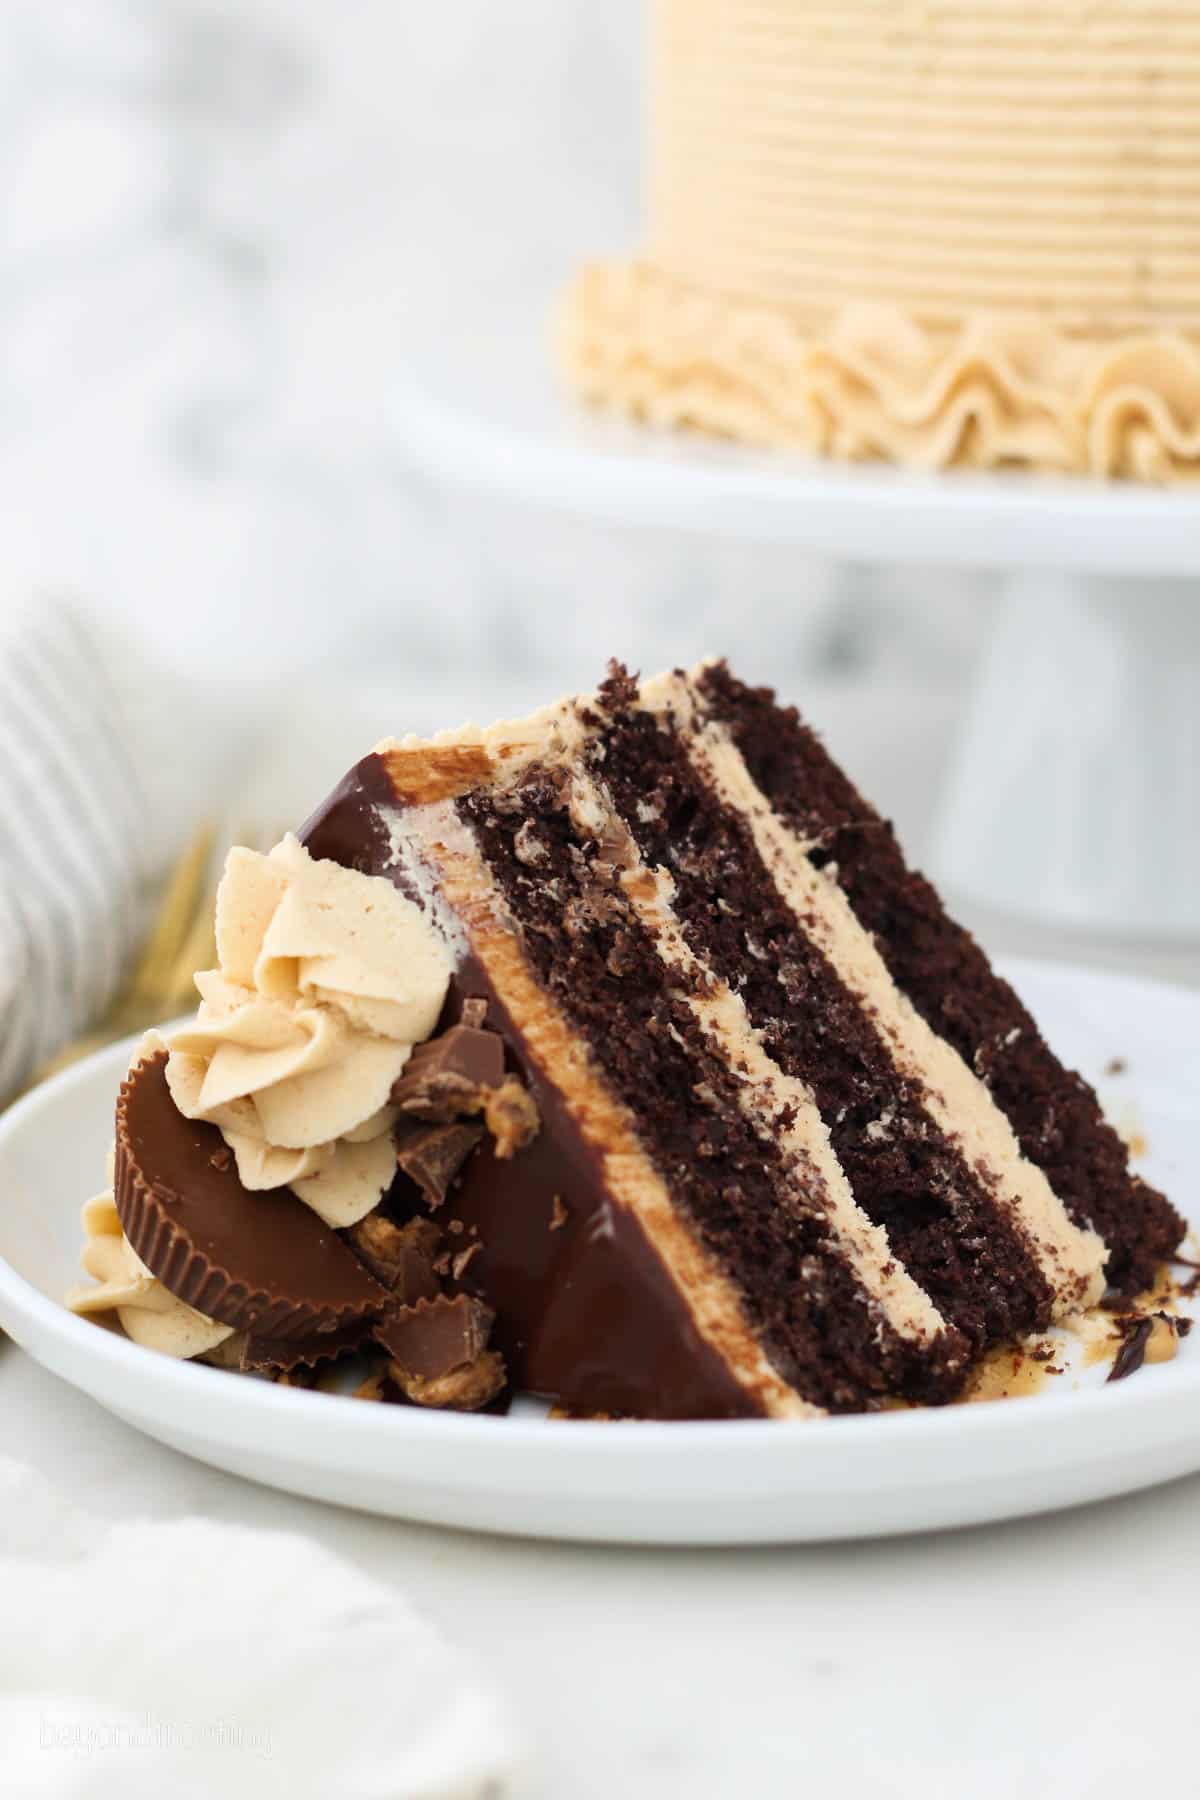 A slice of frosted chocolate peanut butter cake on a white plate, with the remaining cake on a cake stand in the background.